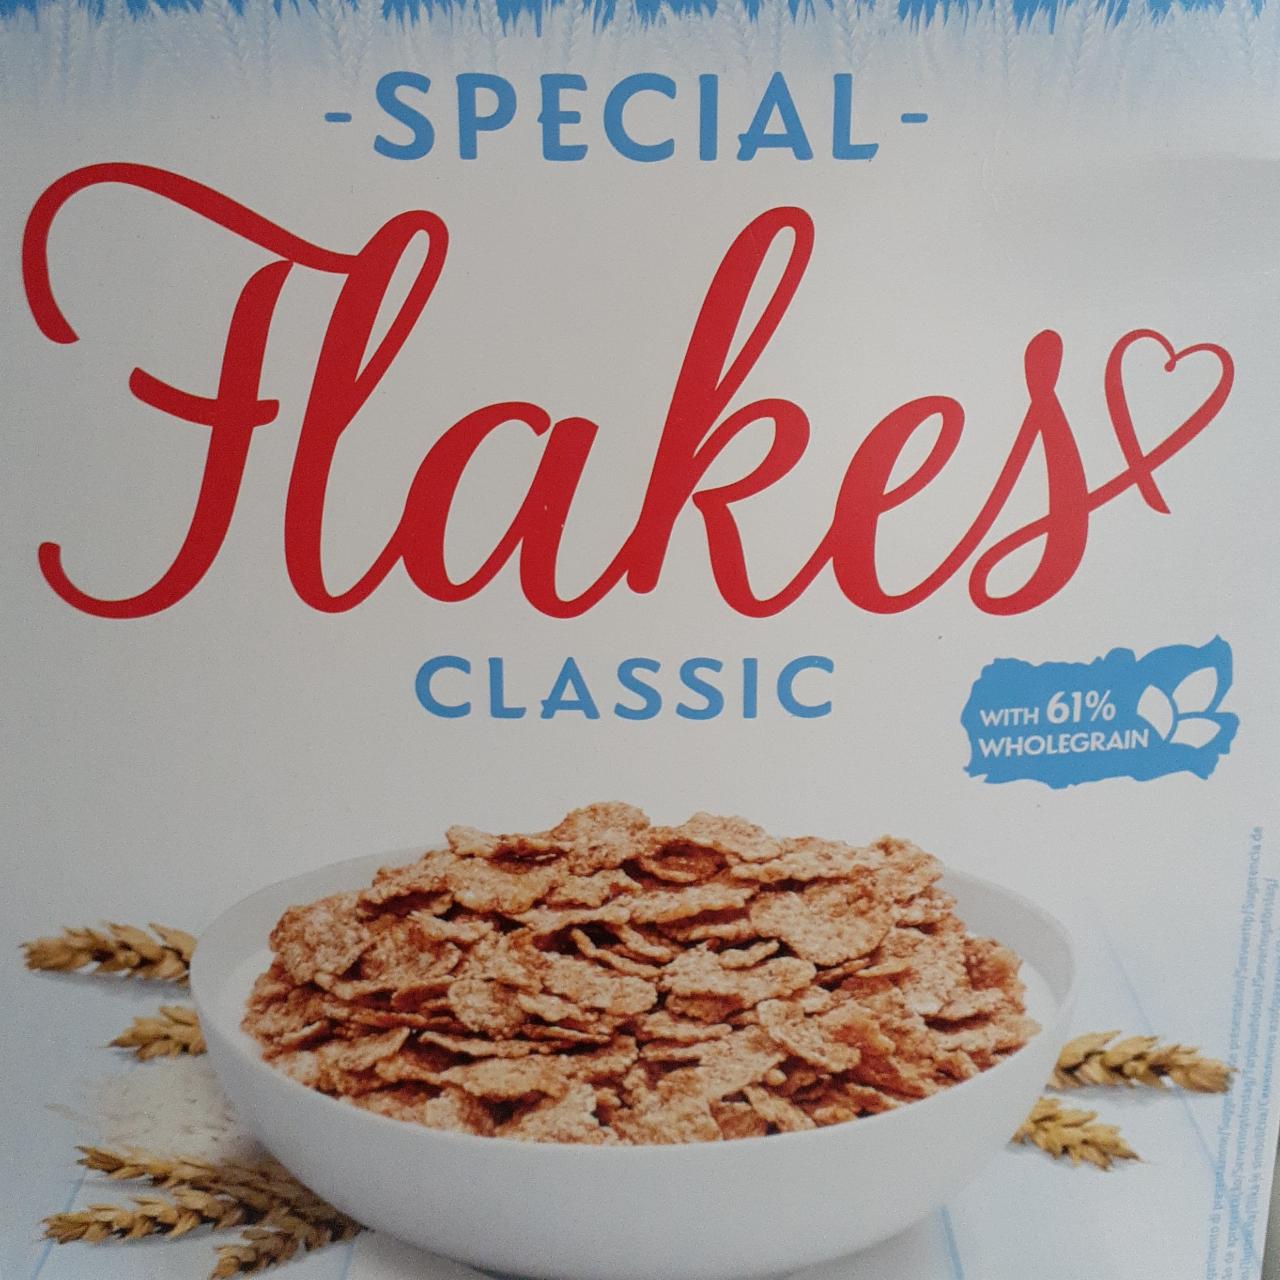 Fotografie - Special Flakes Classic Crownfield